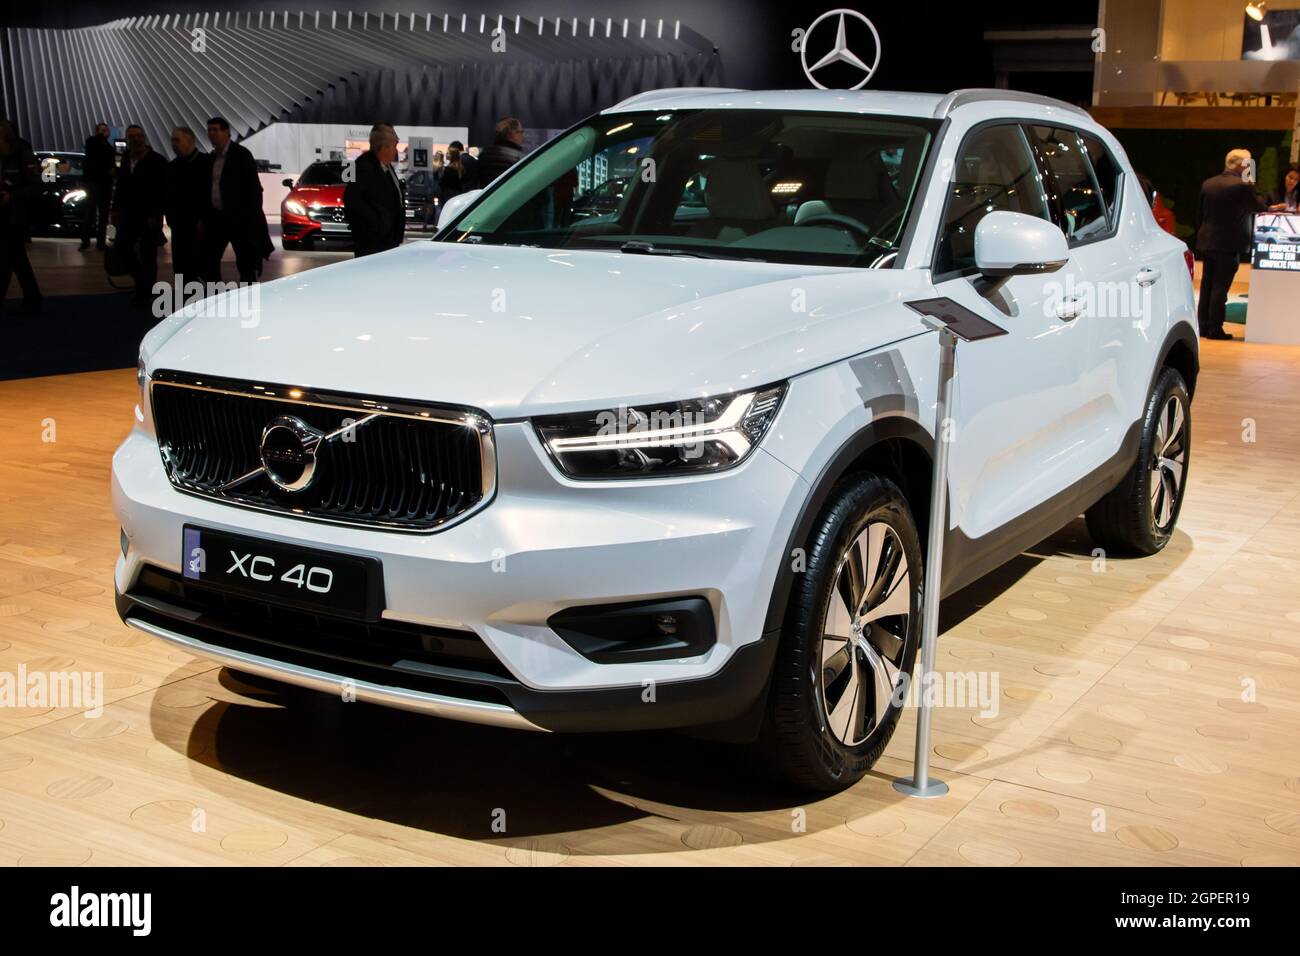 Volvo XC40 car model shown at the Autosalon 2020 Motor Show. Brussels, Belgium - January 9, 2020. Stock Photo